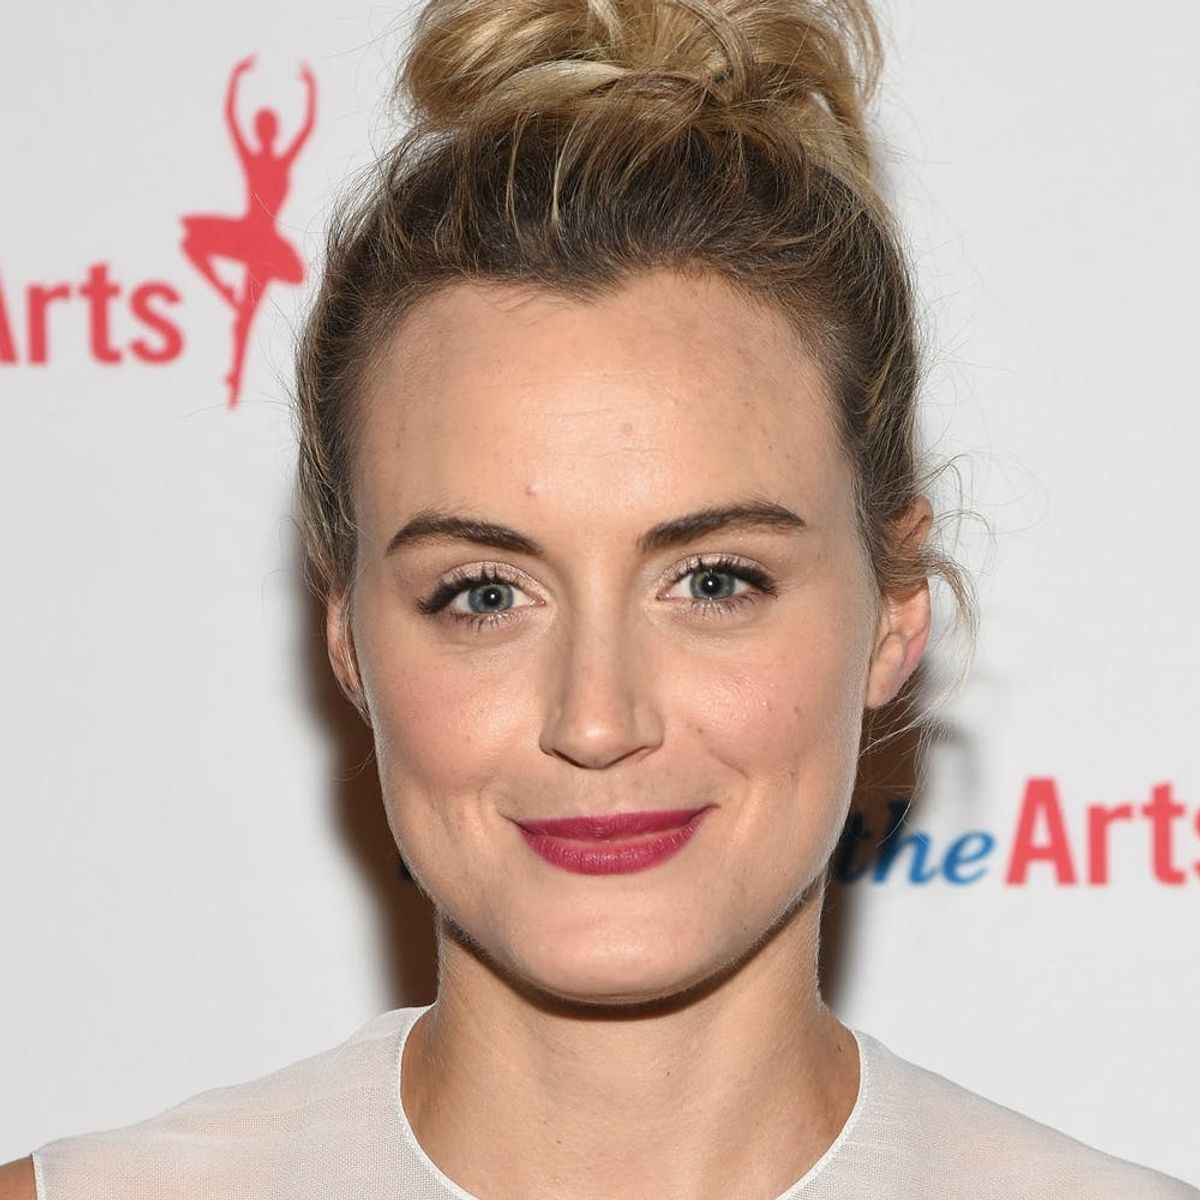 Taylor Schilling’s Hysterical Shopping Hack + 7 More Celeb DIYs